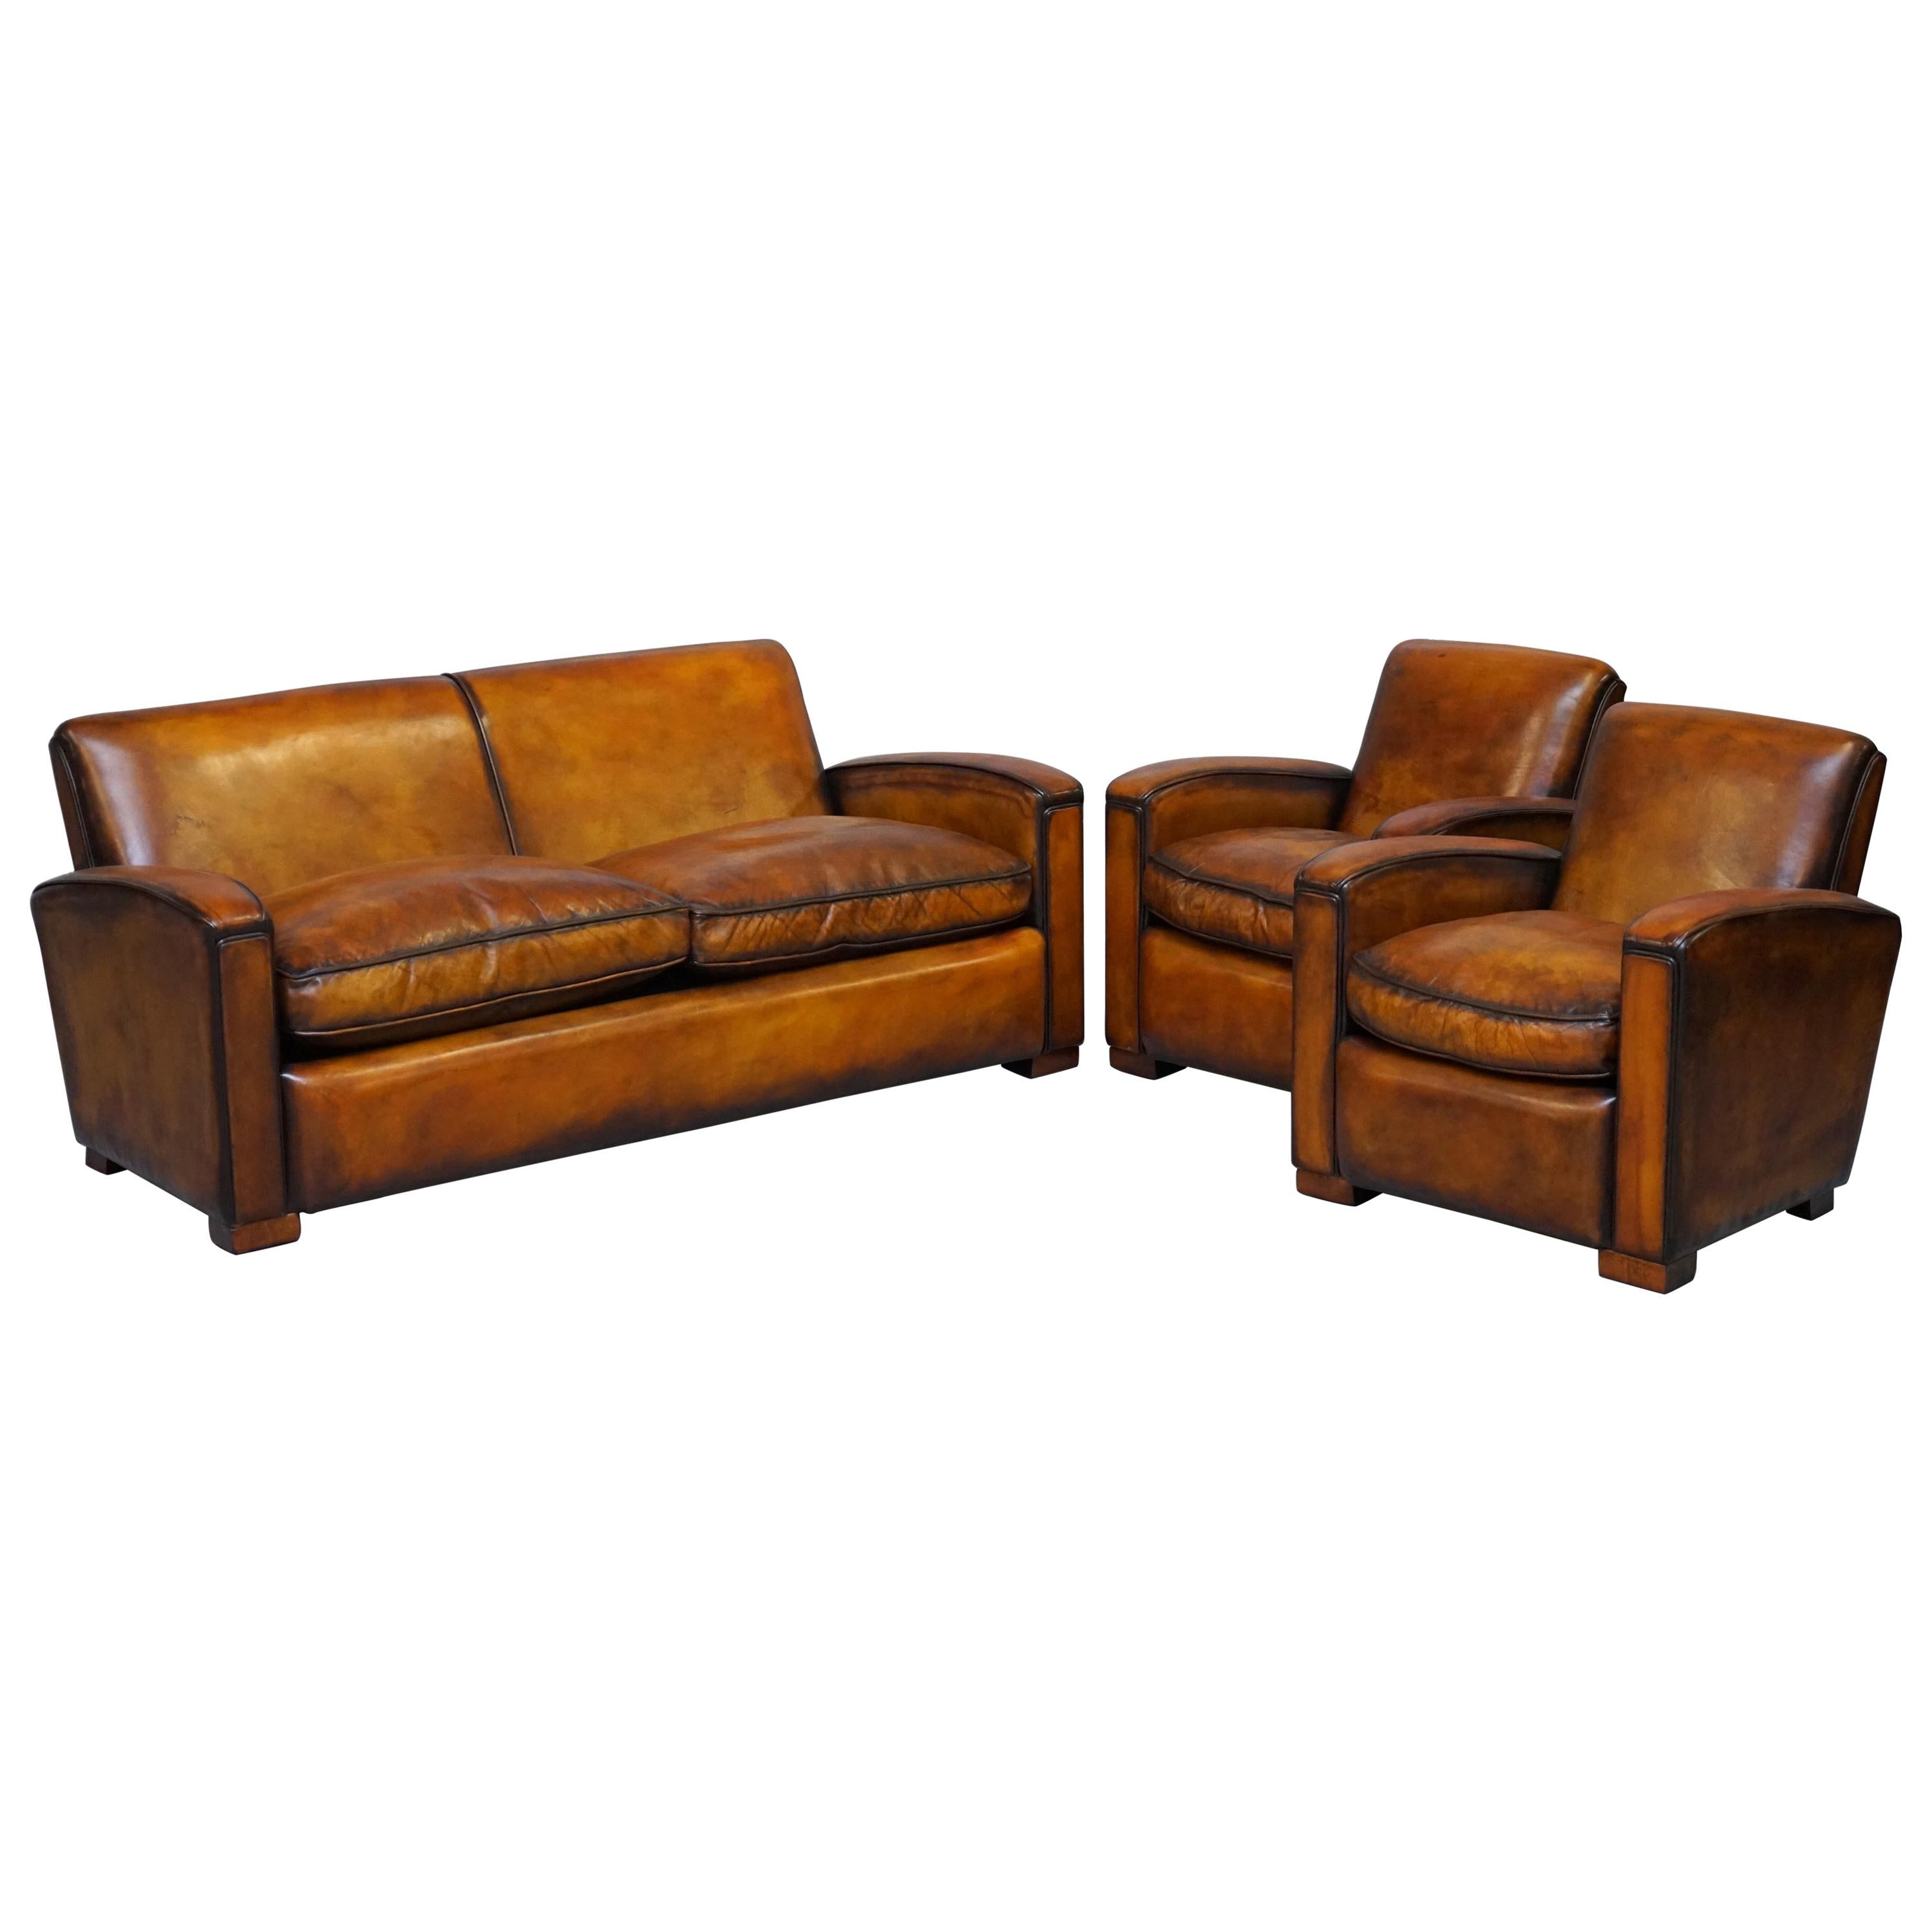 Stunning Art Deco Restored Whisky Brown Leather Sofa & Pair of Armchairs Suite